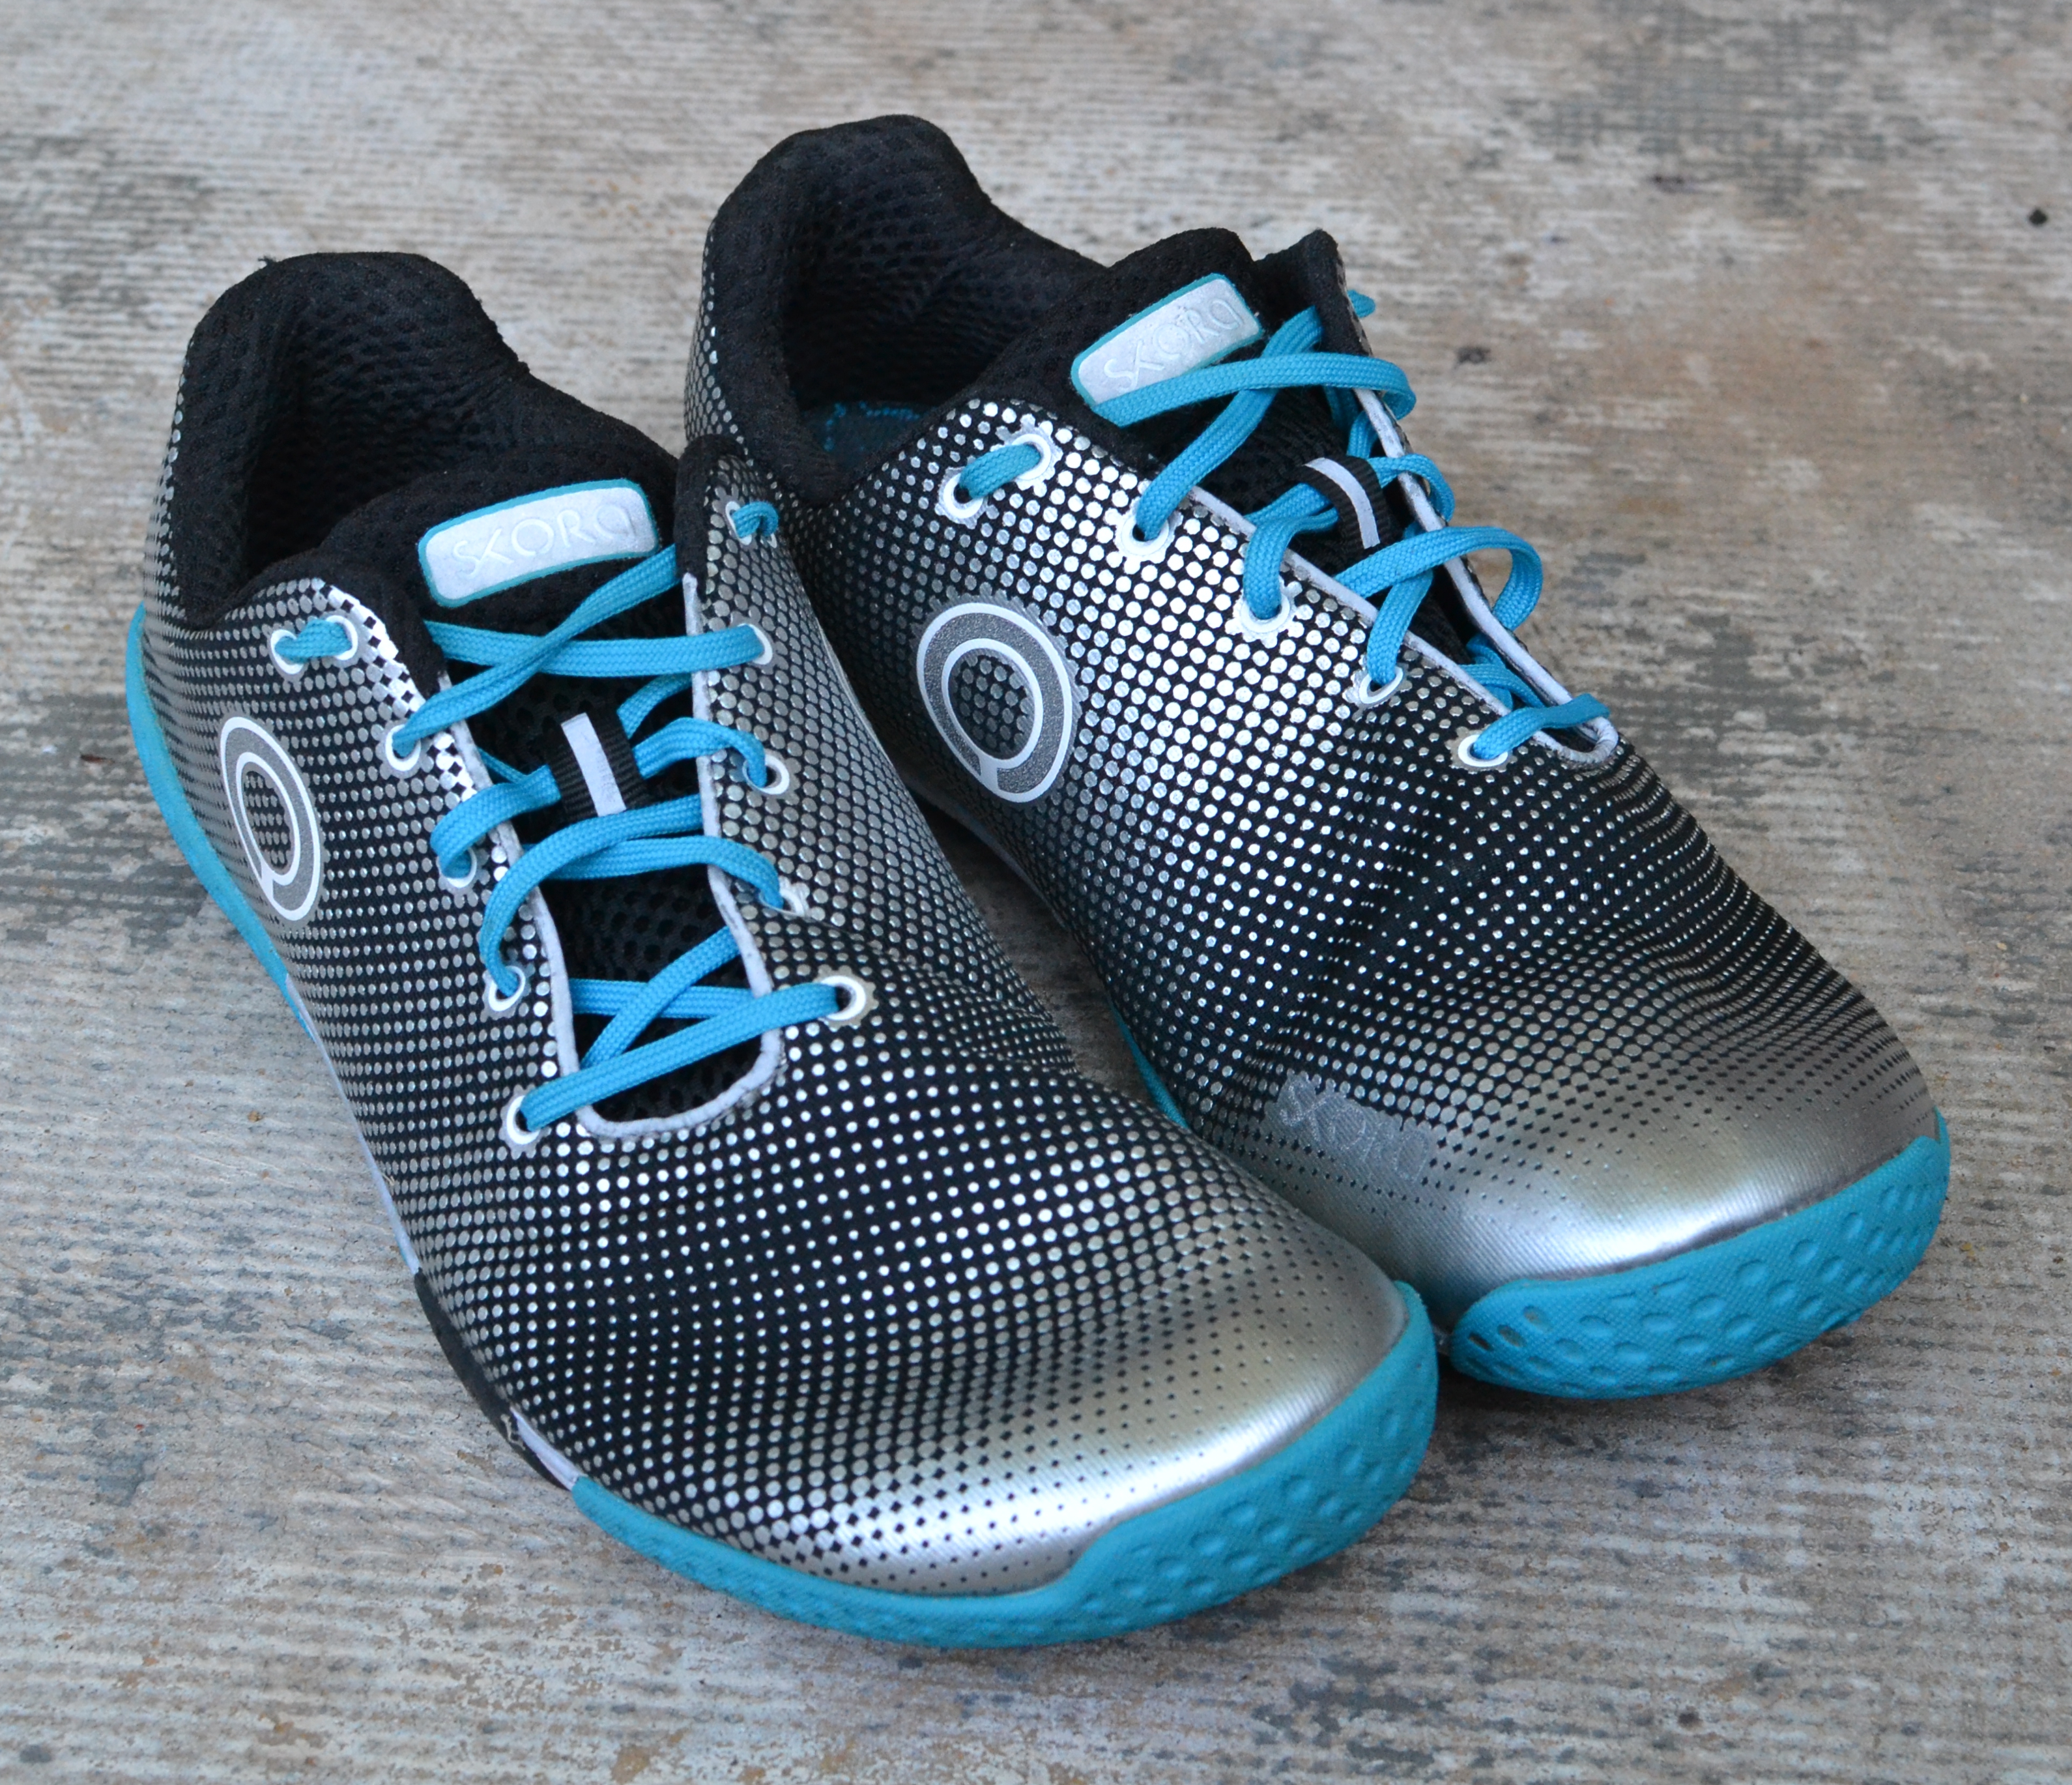  Skora Fit Review The Shoe I Wanted To Love